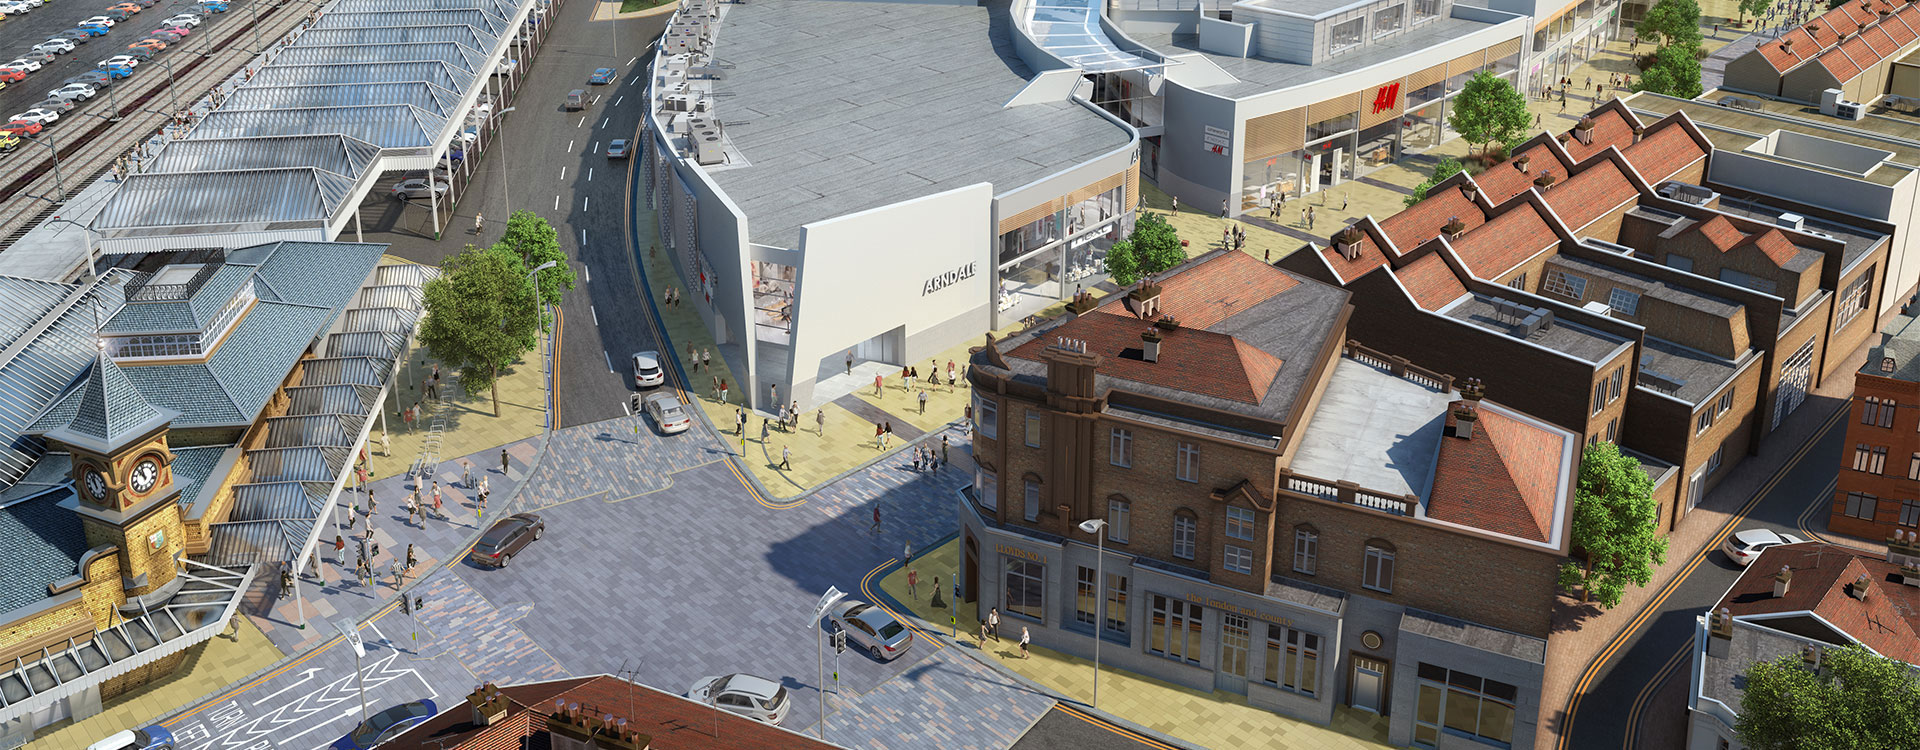 Eastbourne Town Centre Redevelopment